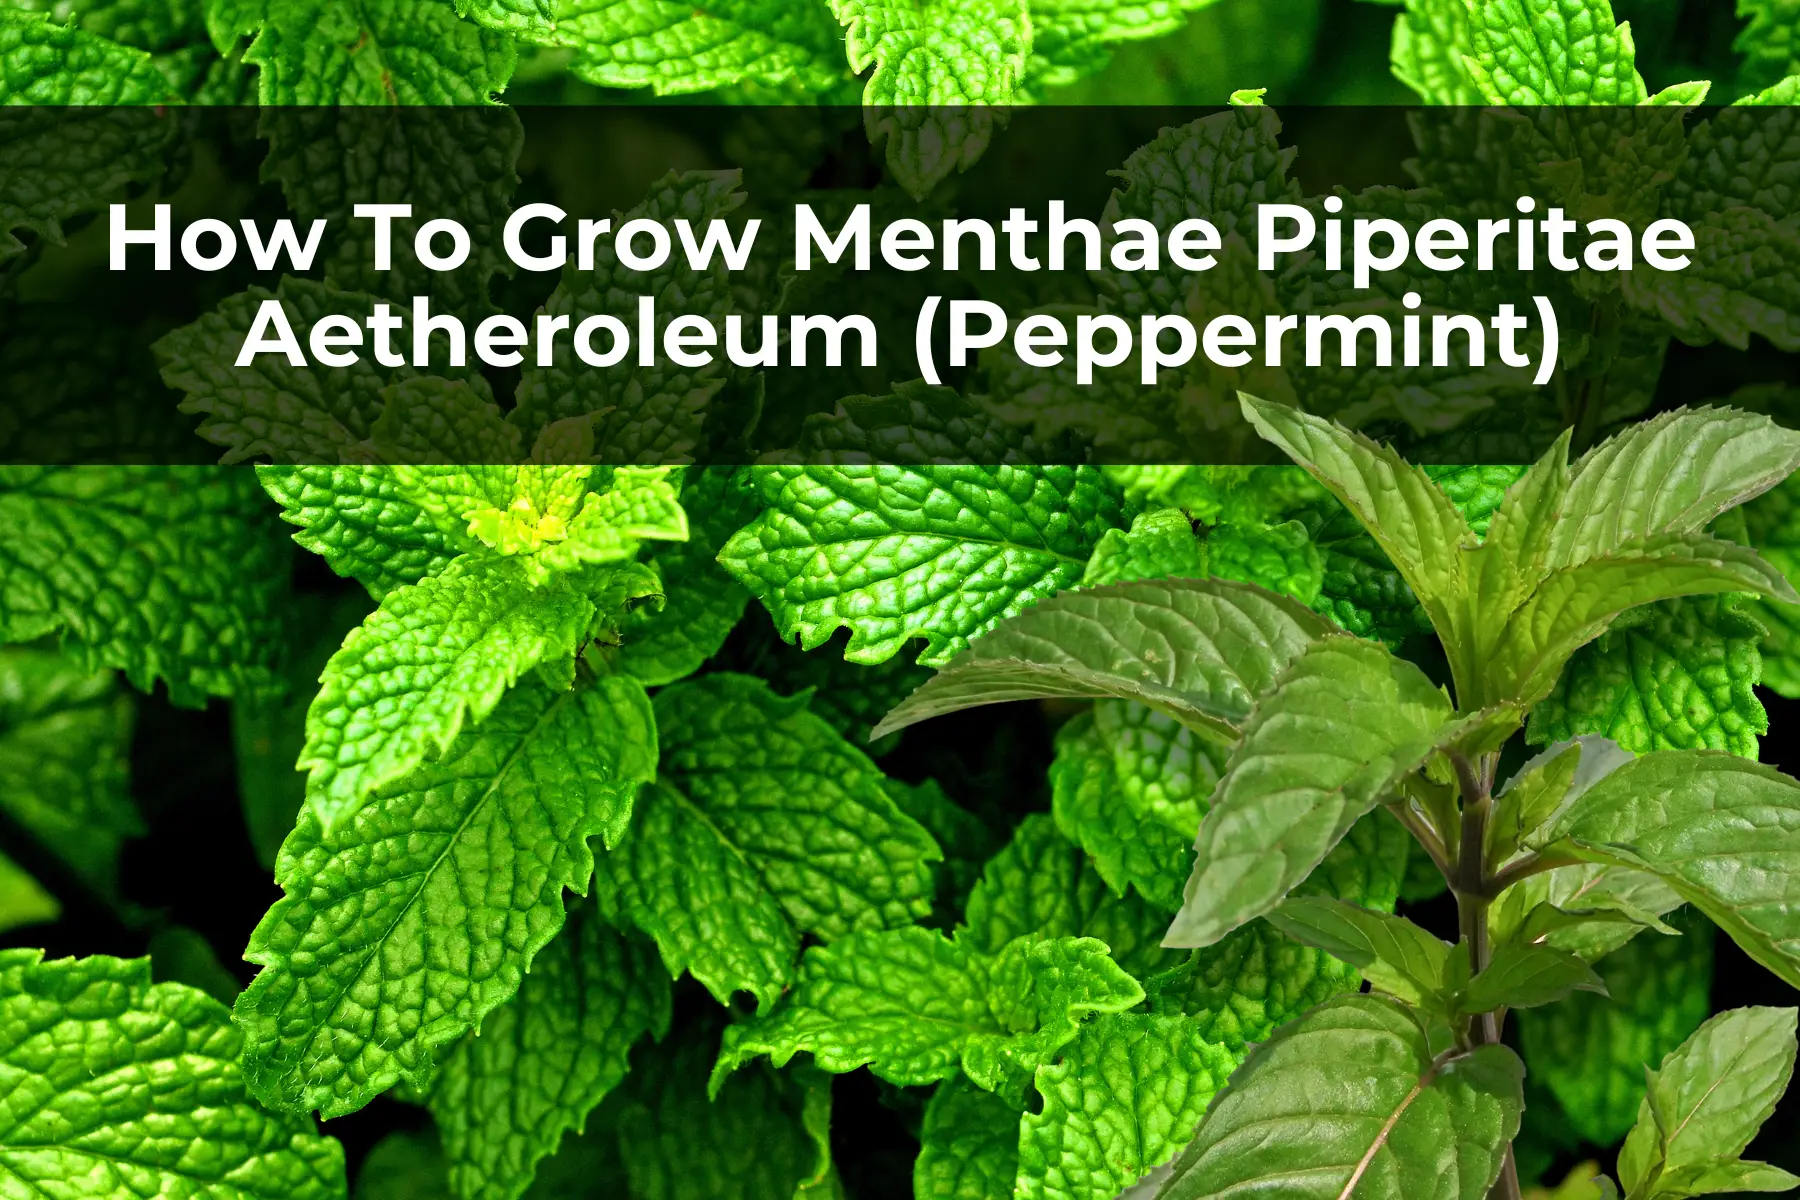 How To Grow Menthae Piperitae Aetheroleum (Peppermint)